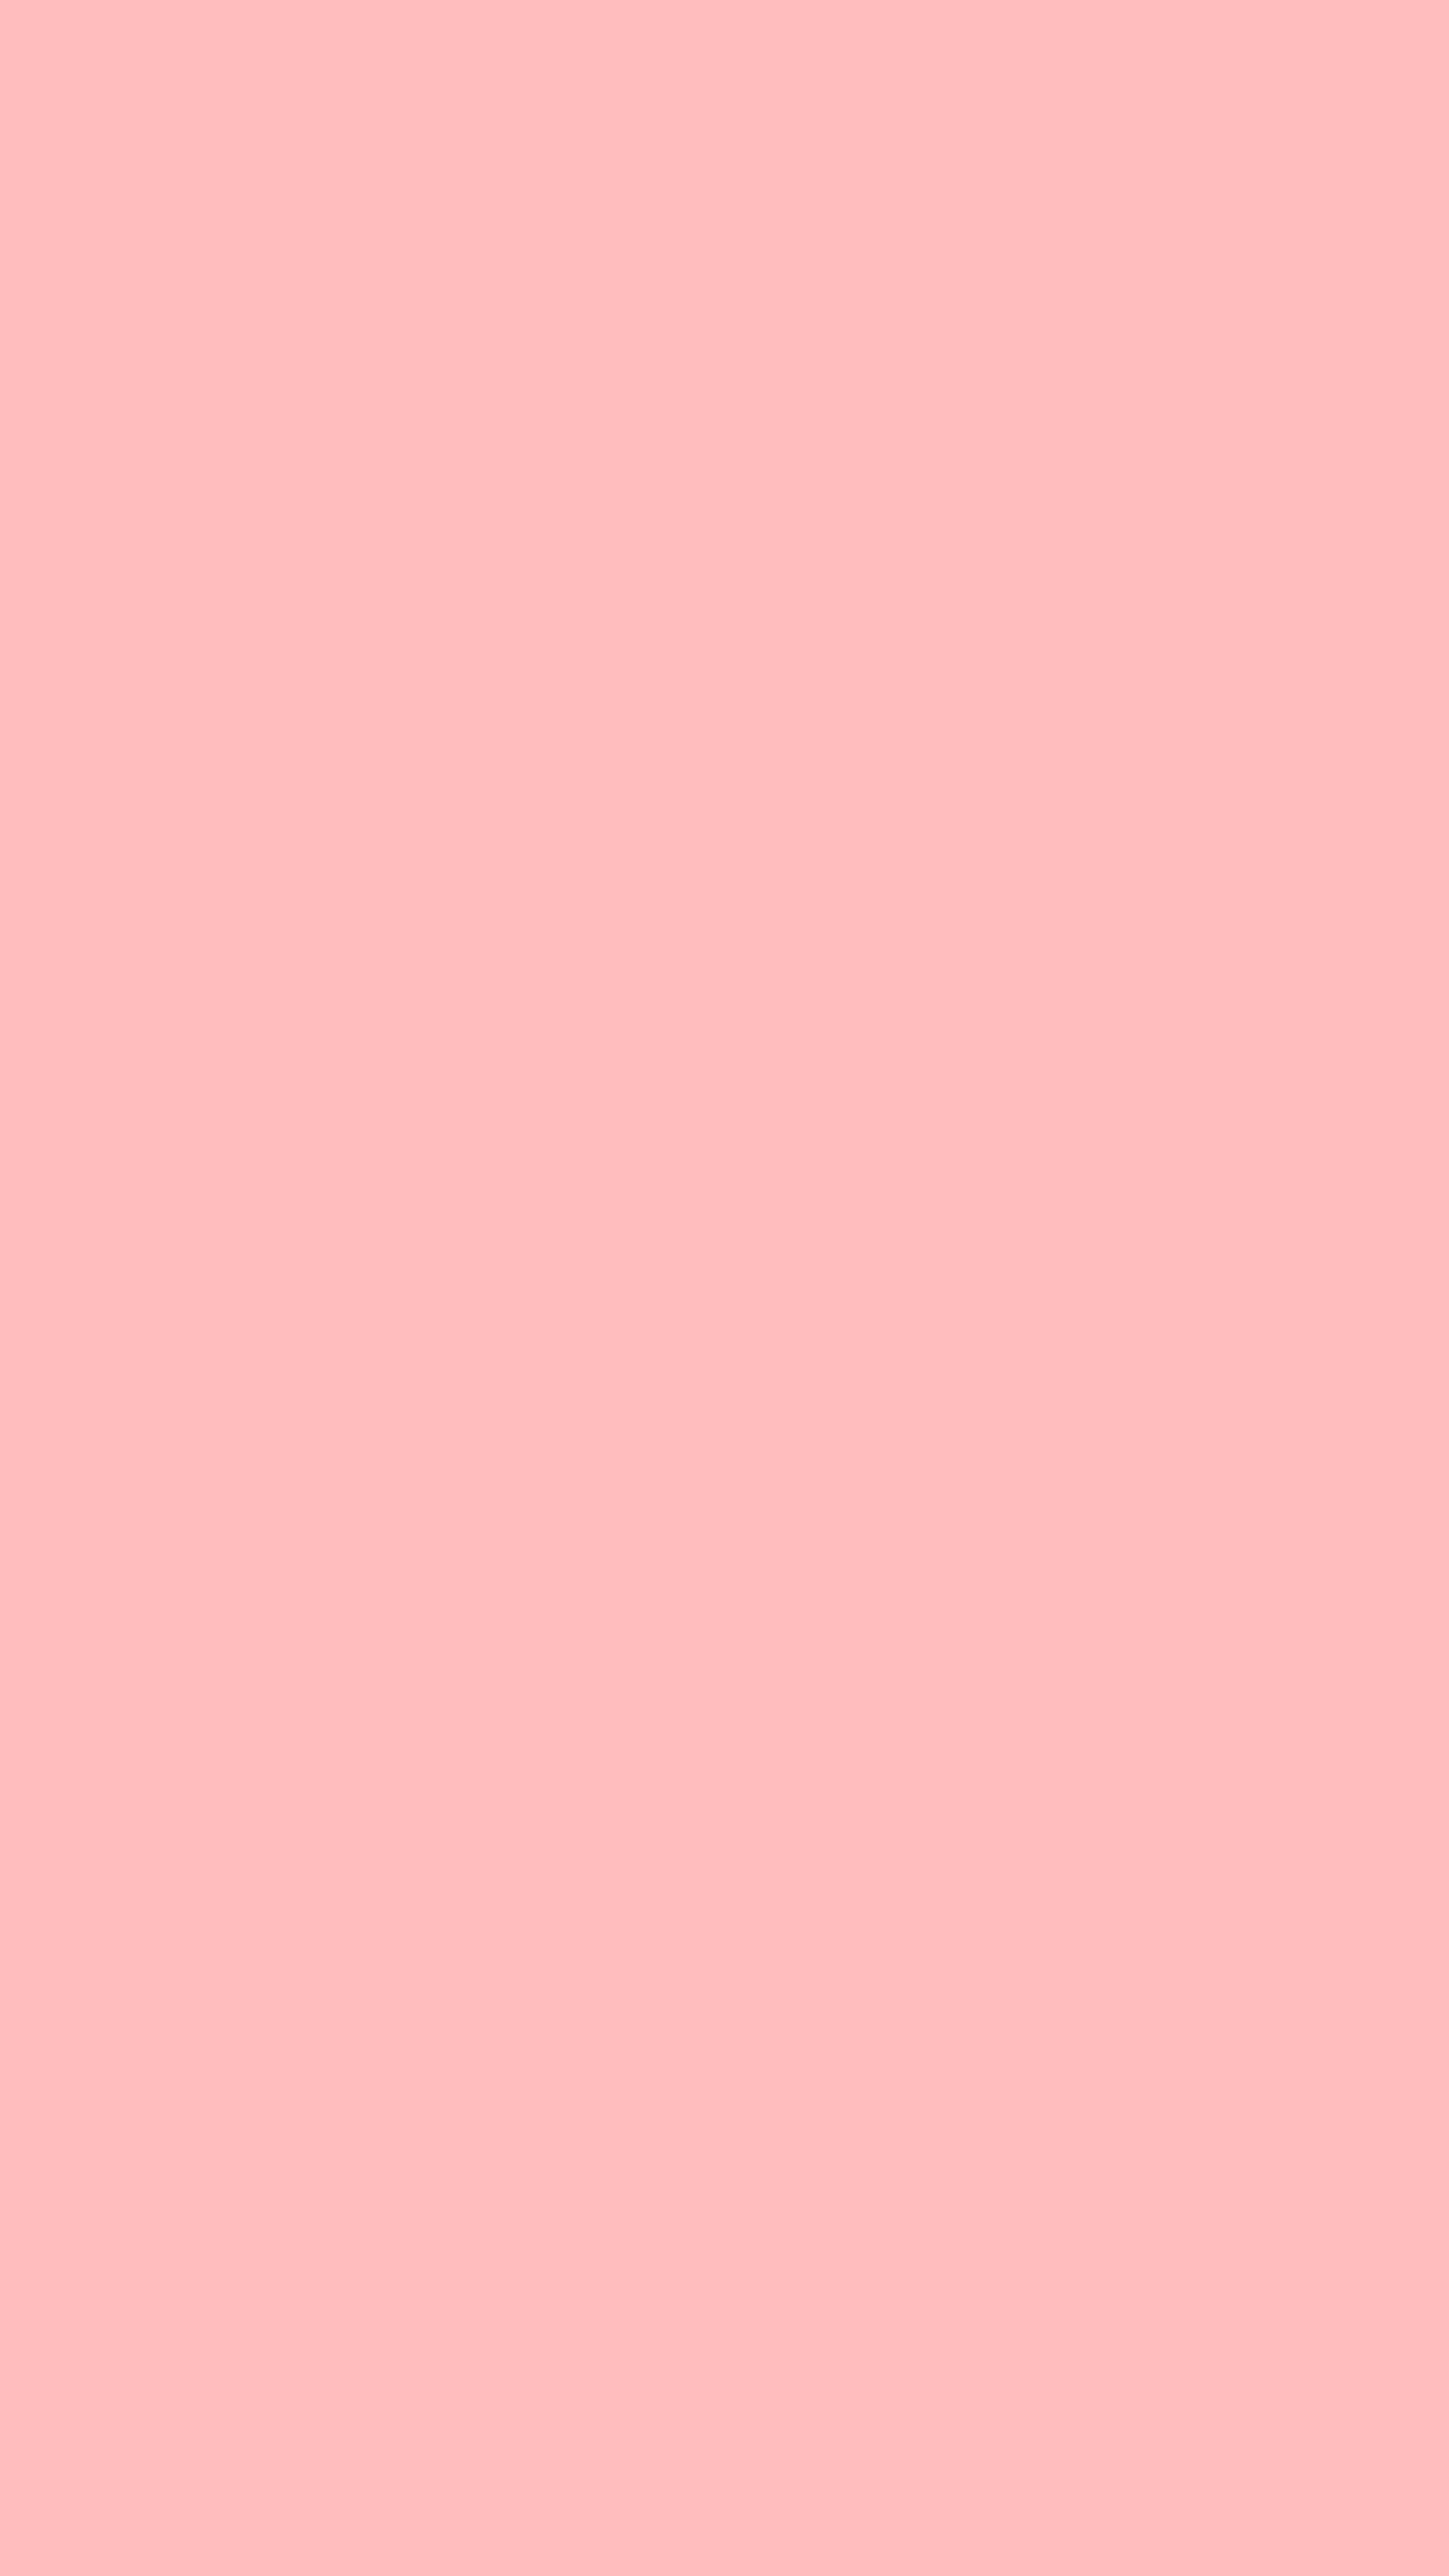 Pretty Pink Plain Color Background Тапет[ae2a355c08f645d5a3f9]